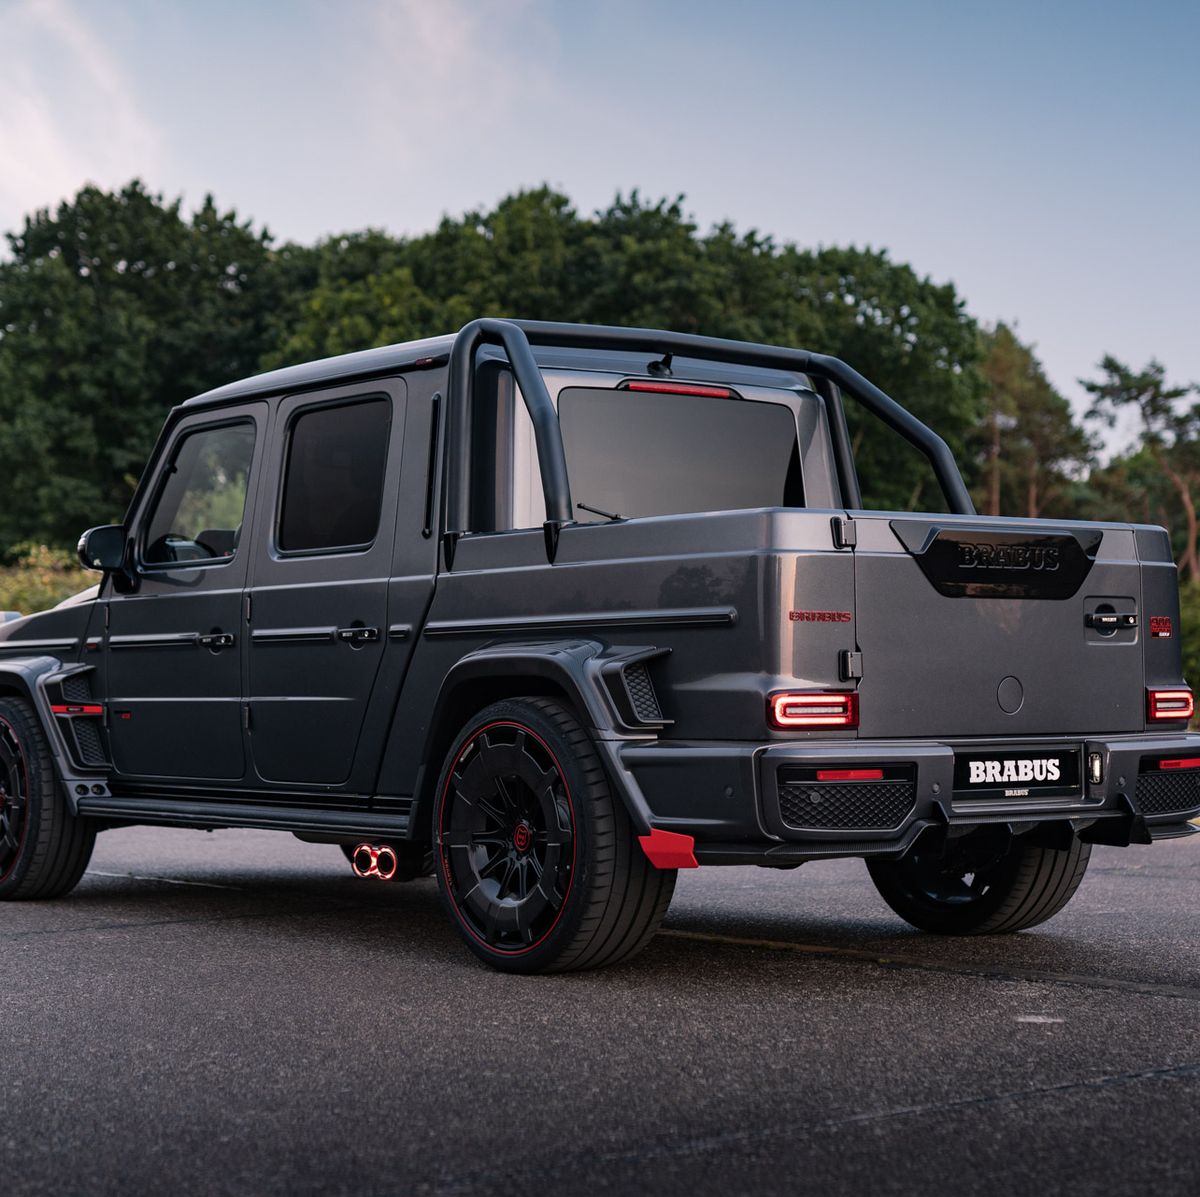 BRABUS 900 ROCKET EDITION – The new limited-edition supercar based on the G  63 